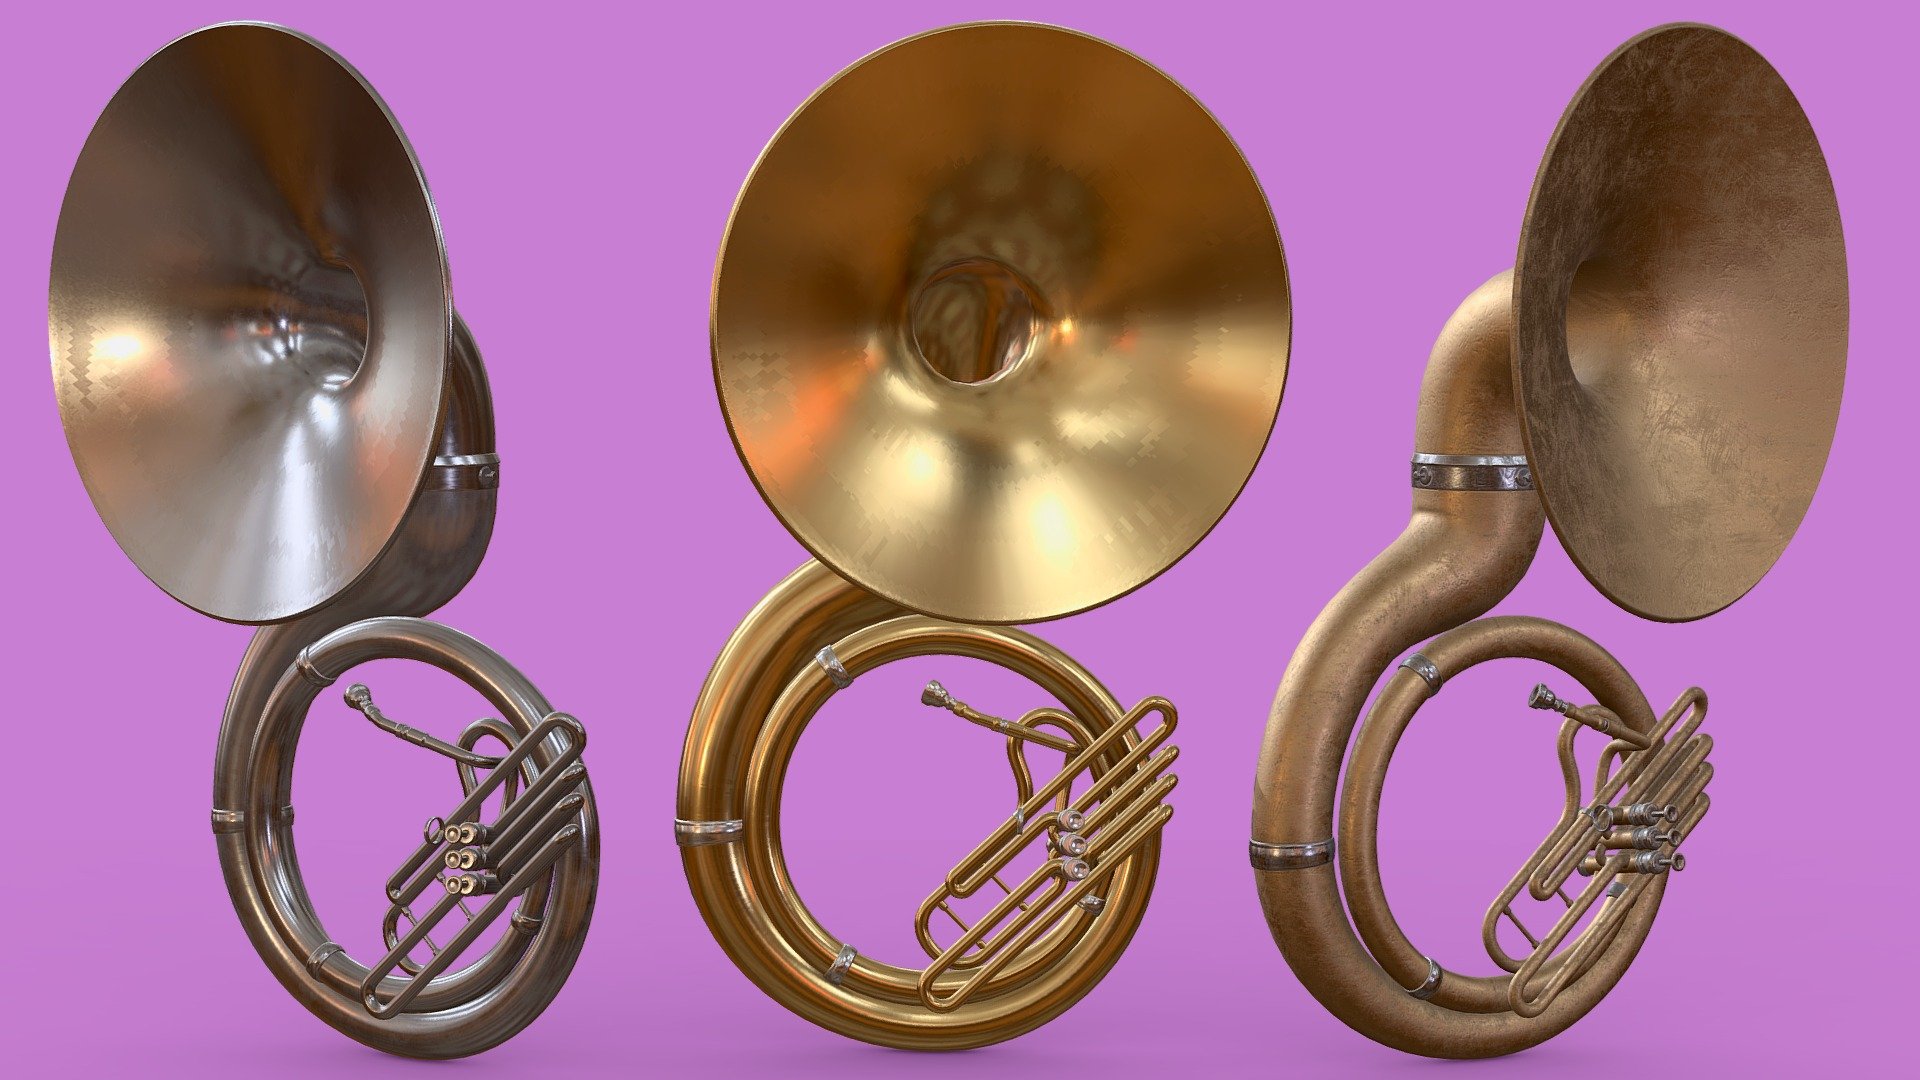 The valves of the tuba are seperate meshes so that they can be animated.



There are three separate texture sets available in the additional files:

- A mint condition brass variant

- A silver variant with accumulated dust

- A dull variant with wear and tear



All three texture sets are packed and ready for import into Unreal and Unity with proper texture settings. An unpacked roughness metallic set is included as well for generic work. For further customization, I've included the baked mesh maps that were generated from the high poly from Substance Painter. While the textures from the Sketchfab viewport are 2048 by 2048, the textures from the additional files are 4096 by 4096 3d model